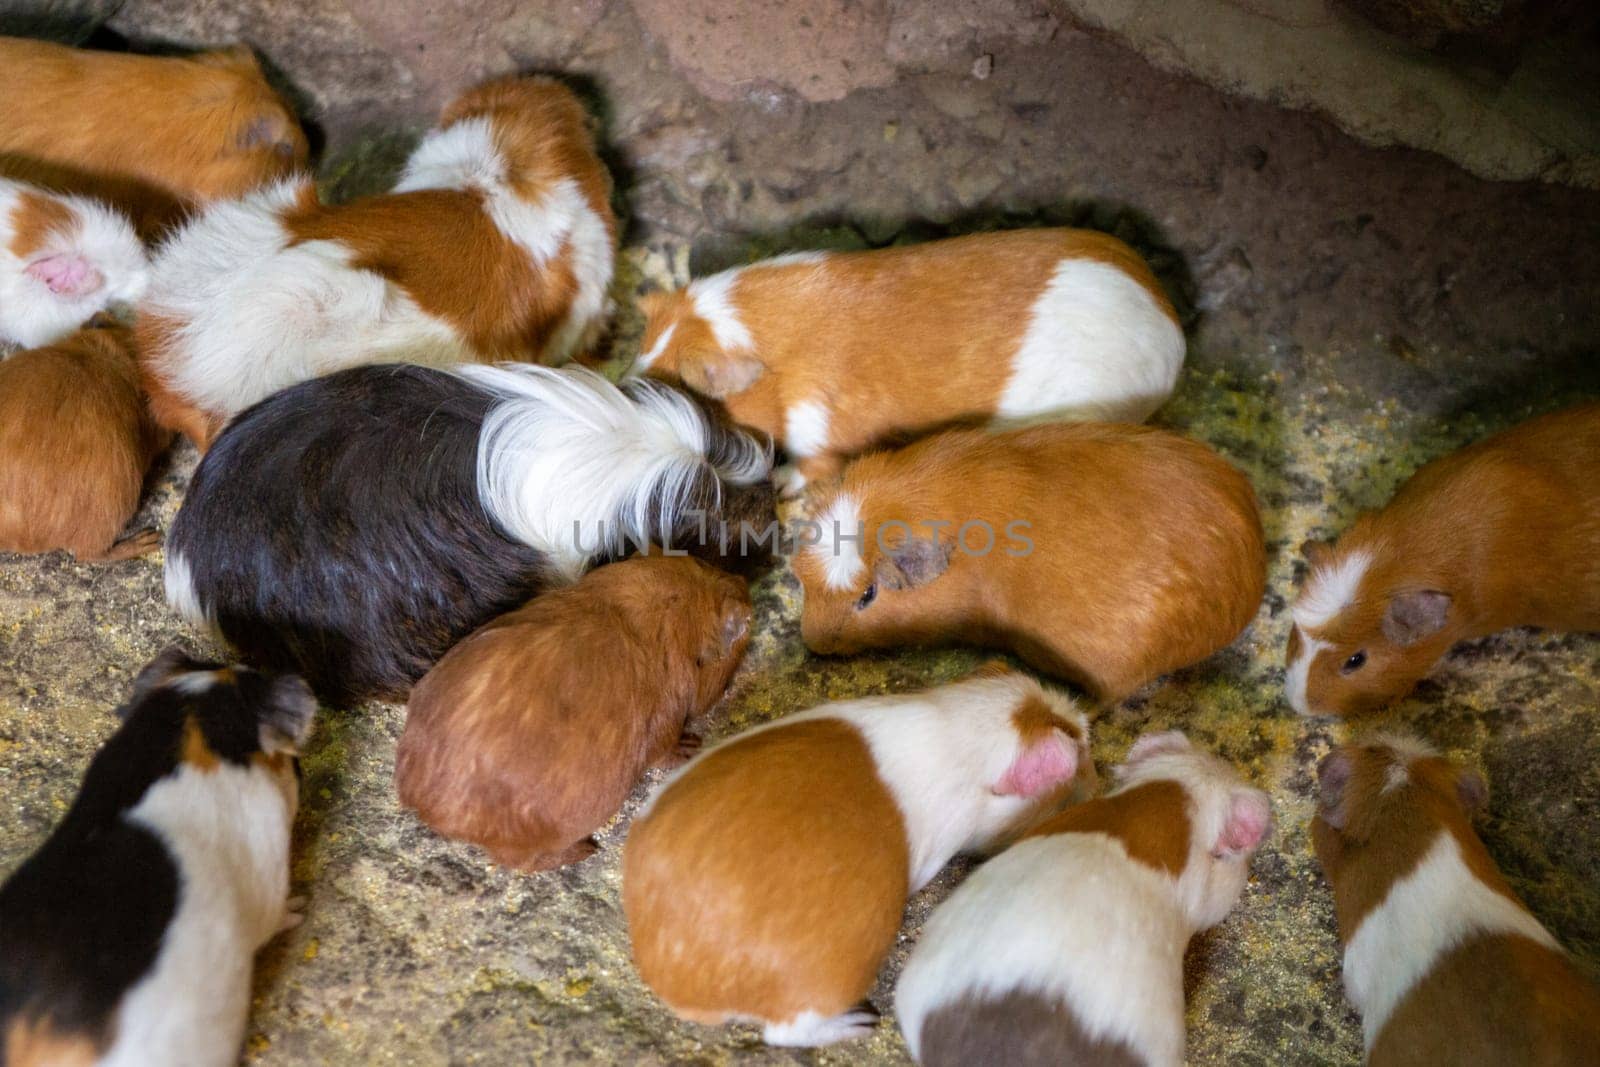 A bunch of guinea pigs or cuy waiting for dinner